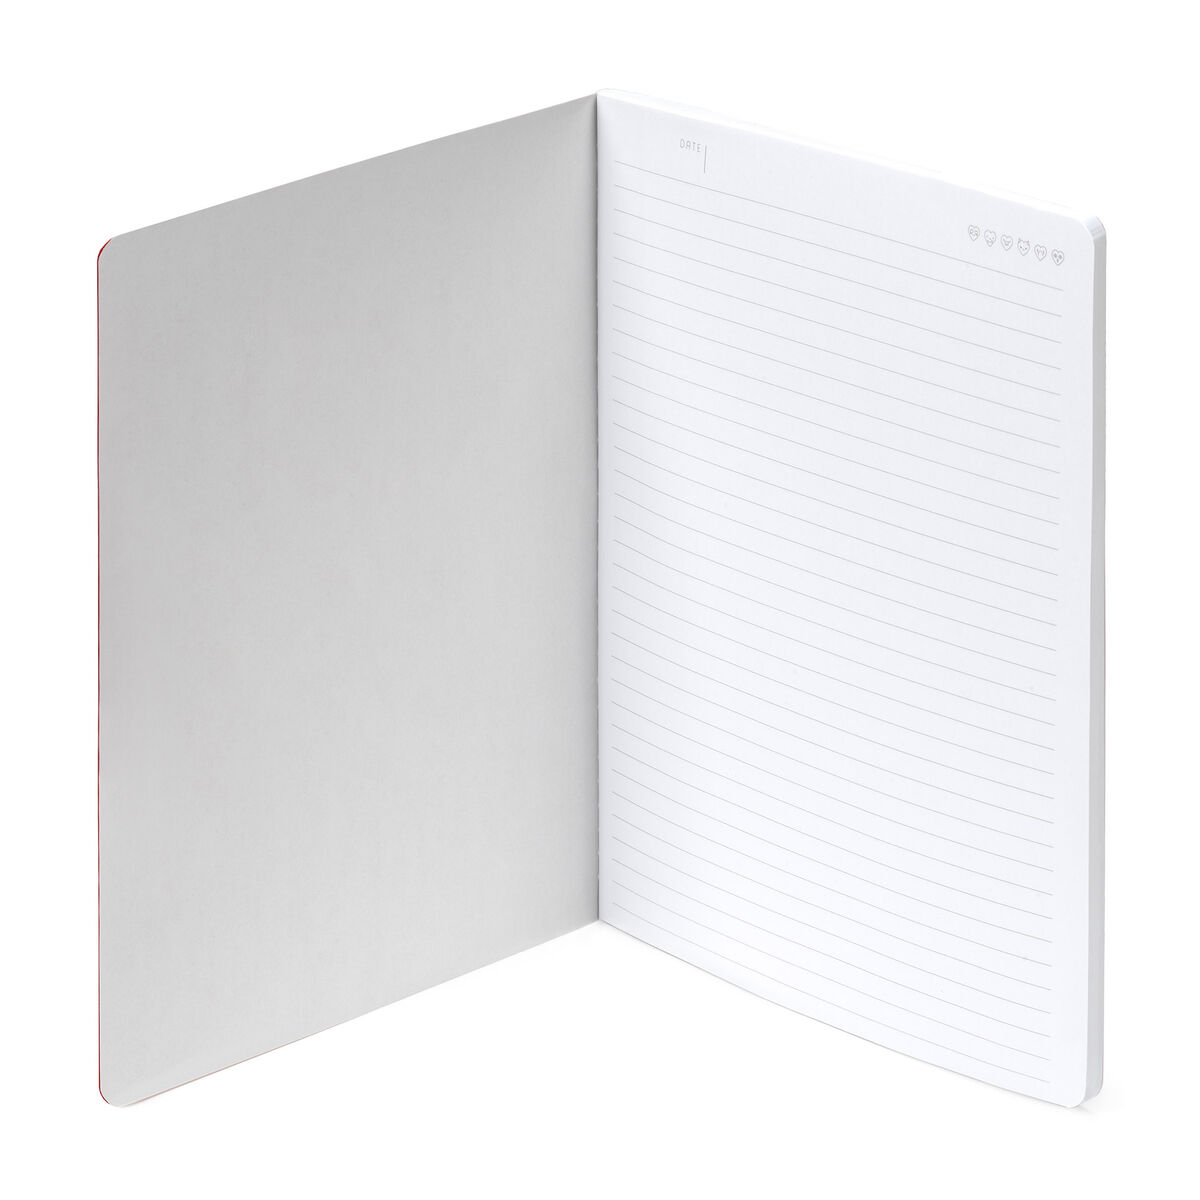 Lined Notebook with Heart B5, , zoo